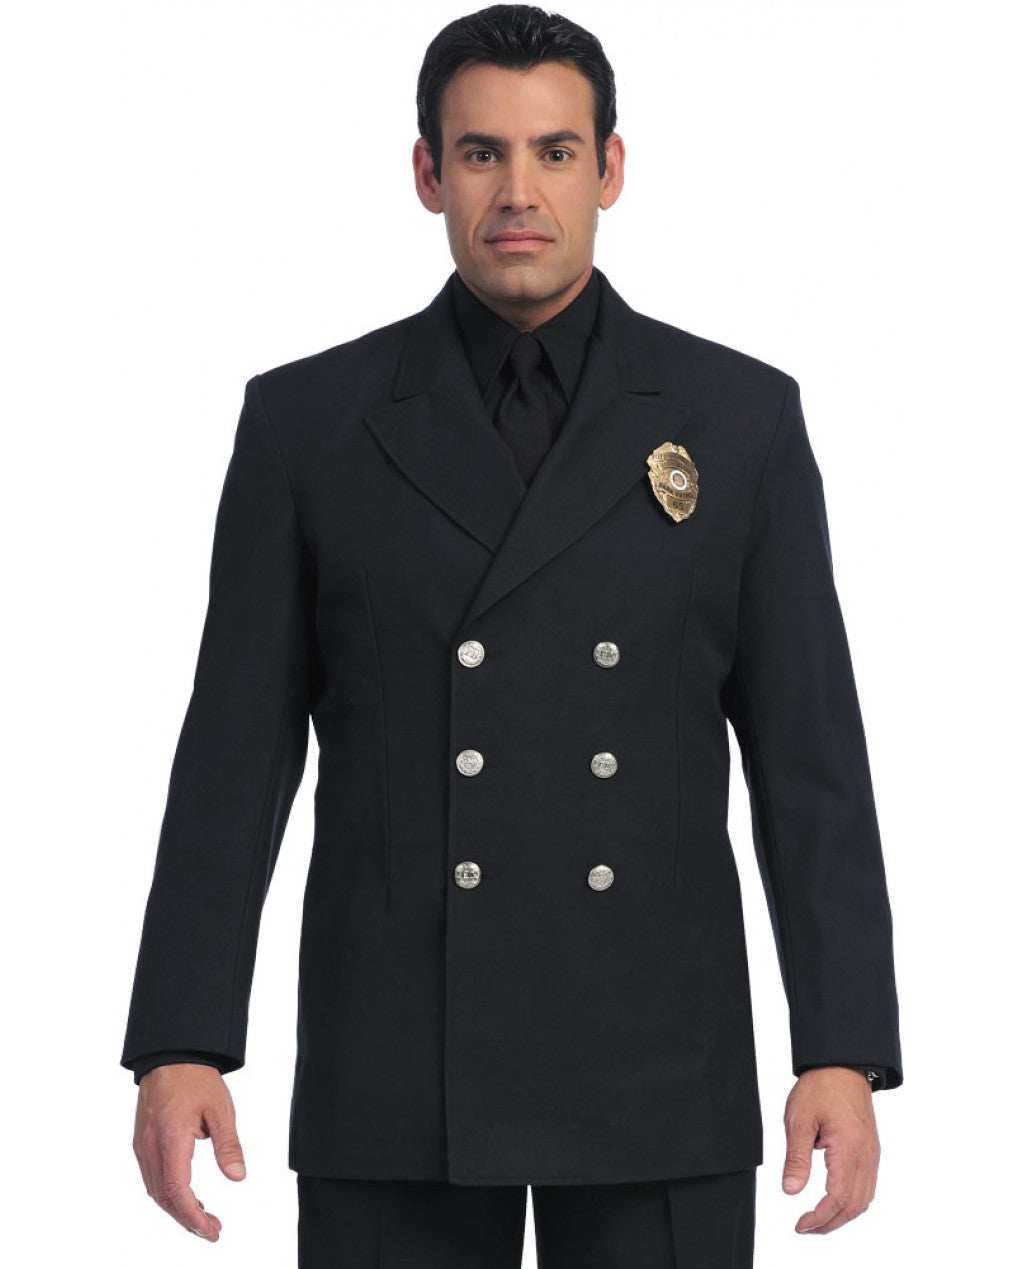 United Uniforms Double Breasted Class A Dress Coat - Polyester/Wool Elastique Weave